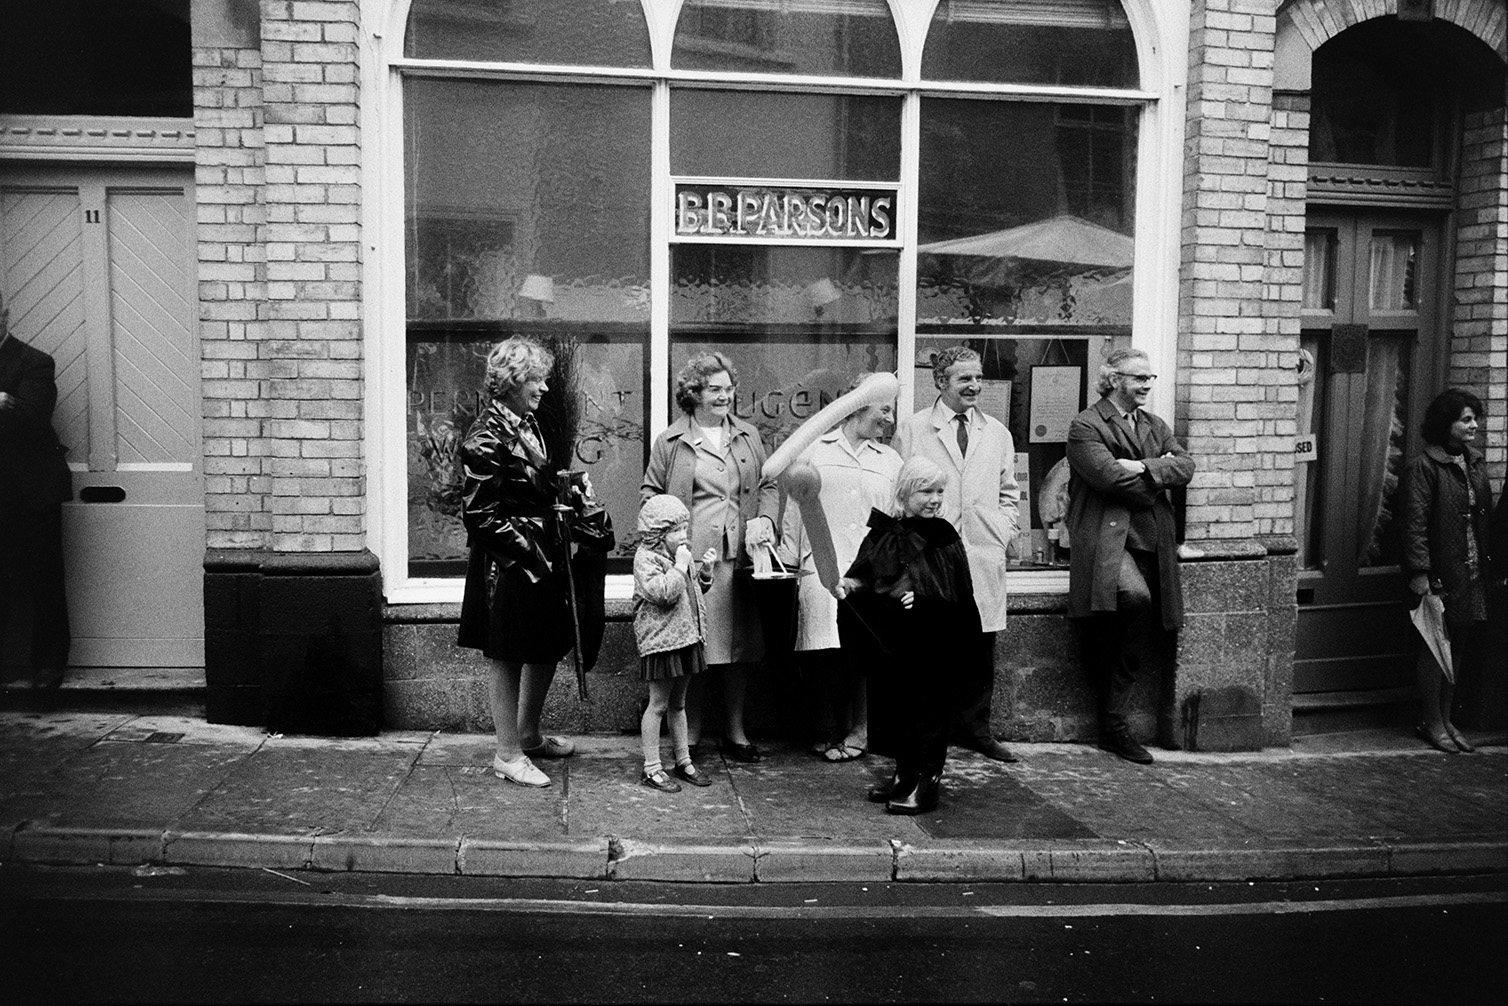 Spectators stood outside B B Parsons shopfront watching the South Molton carnival parade. One of the children is holding a balloon. The shop later became a hairdressers and then a chiropractors.